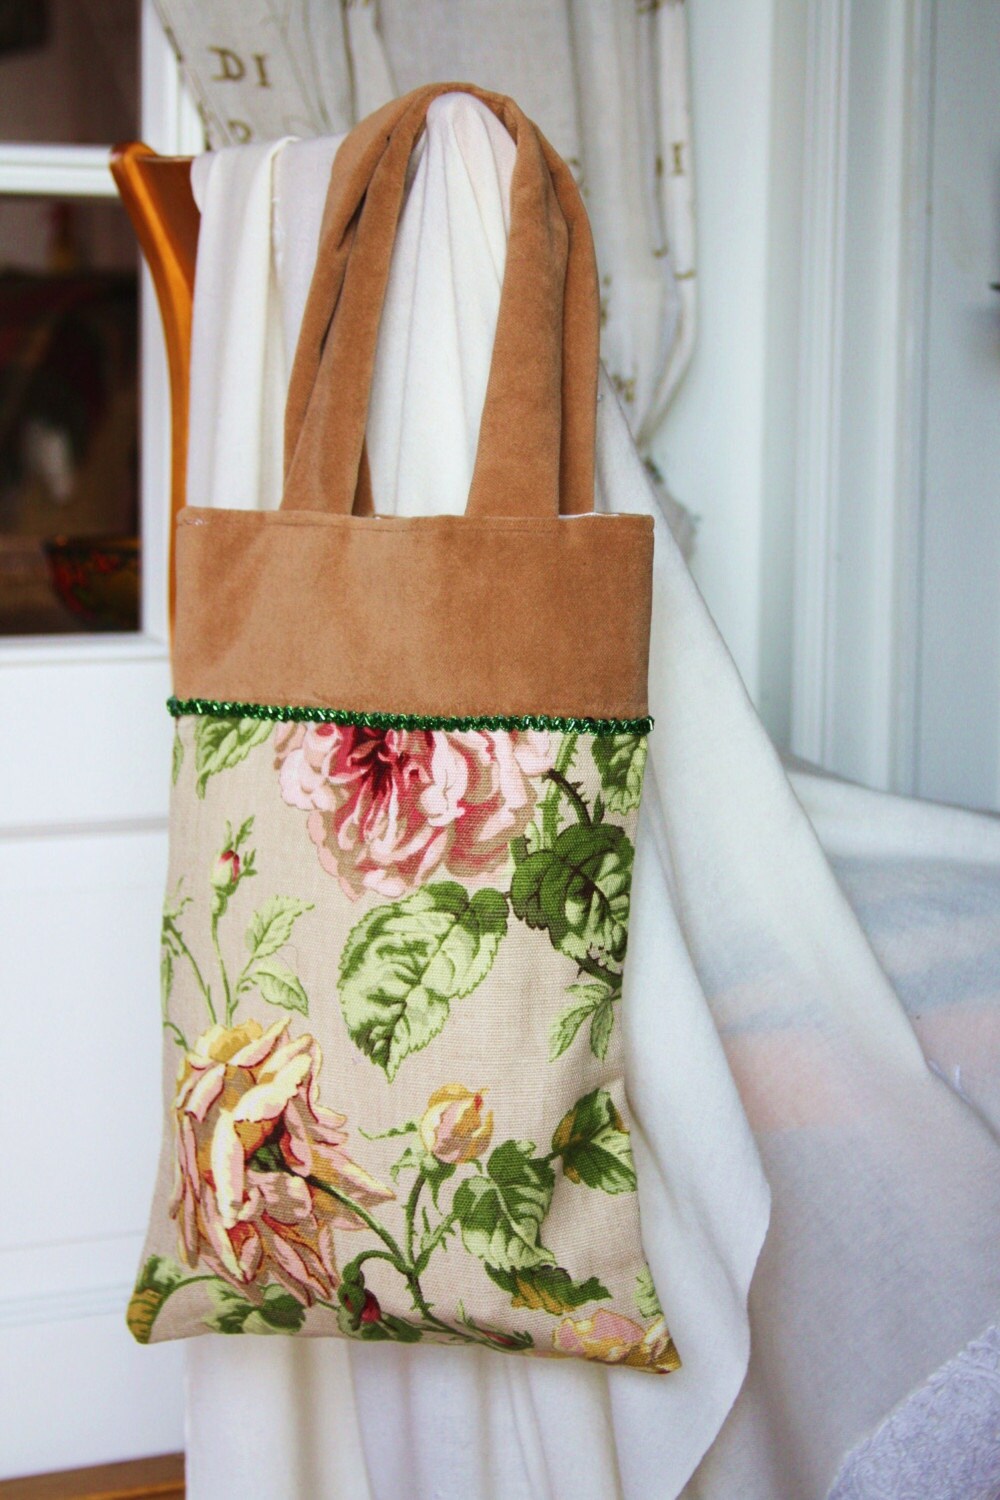 SALE Bag of Beauty and Roses Linnen and Velvet Adorned With - Etsy